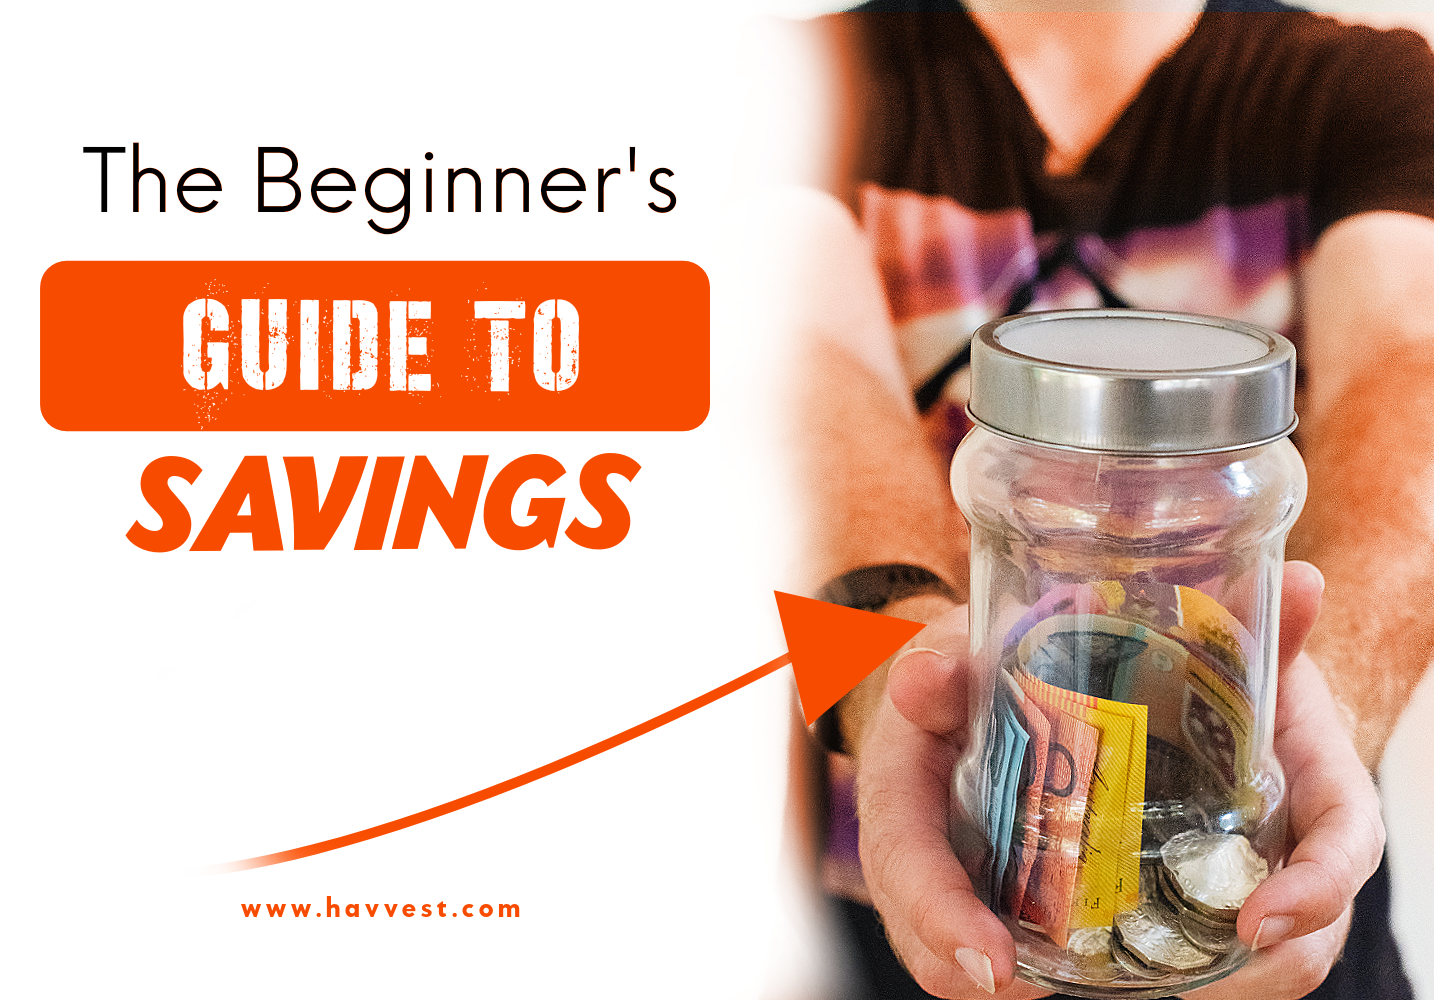 The Beginner's Guide to Saving